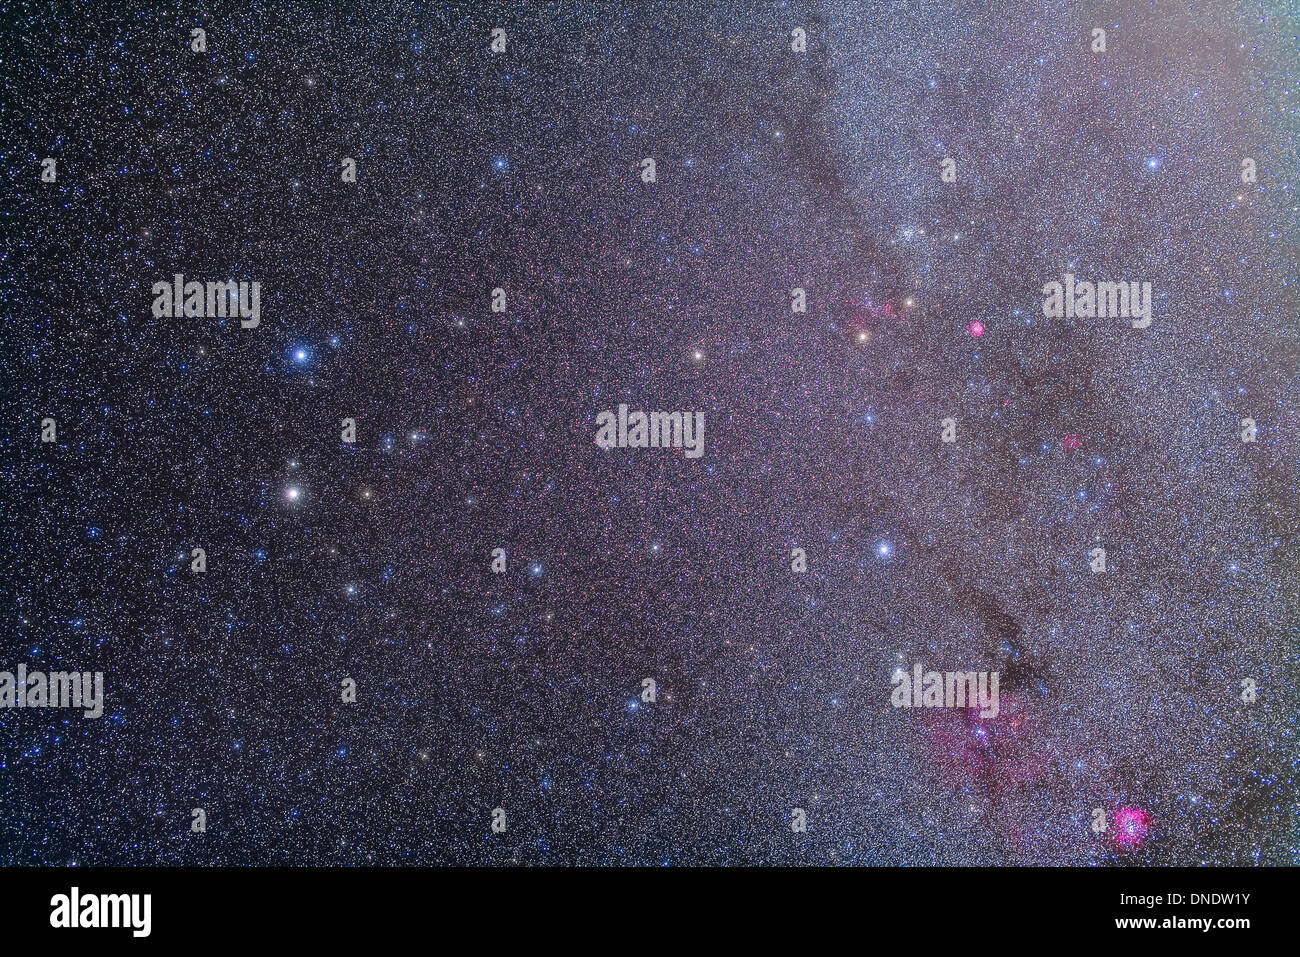 Widefield view of the Gemini constellation with many deep sky objects visible. Stock Photo